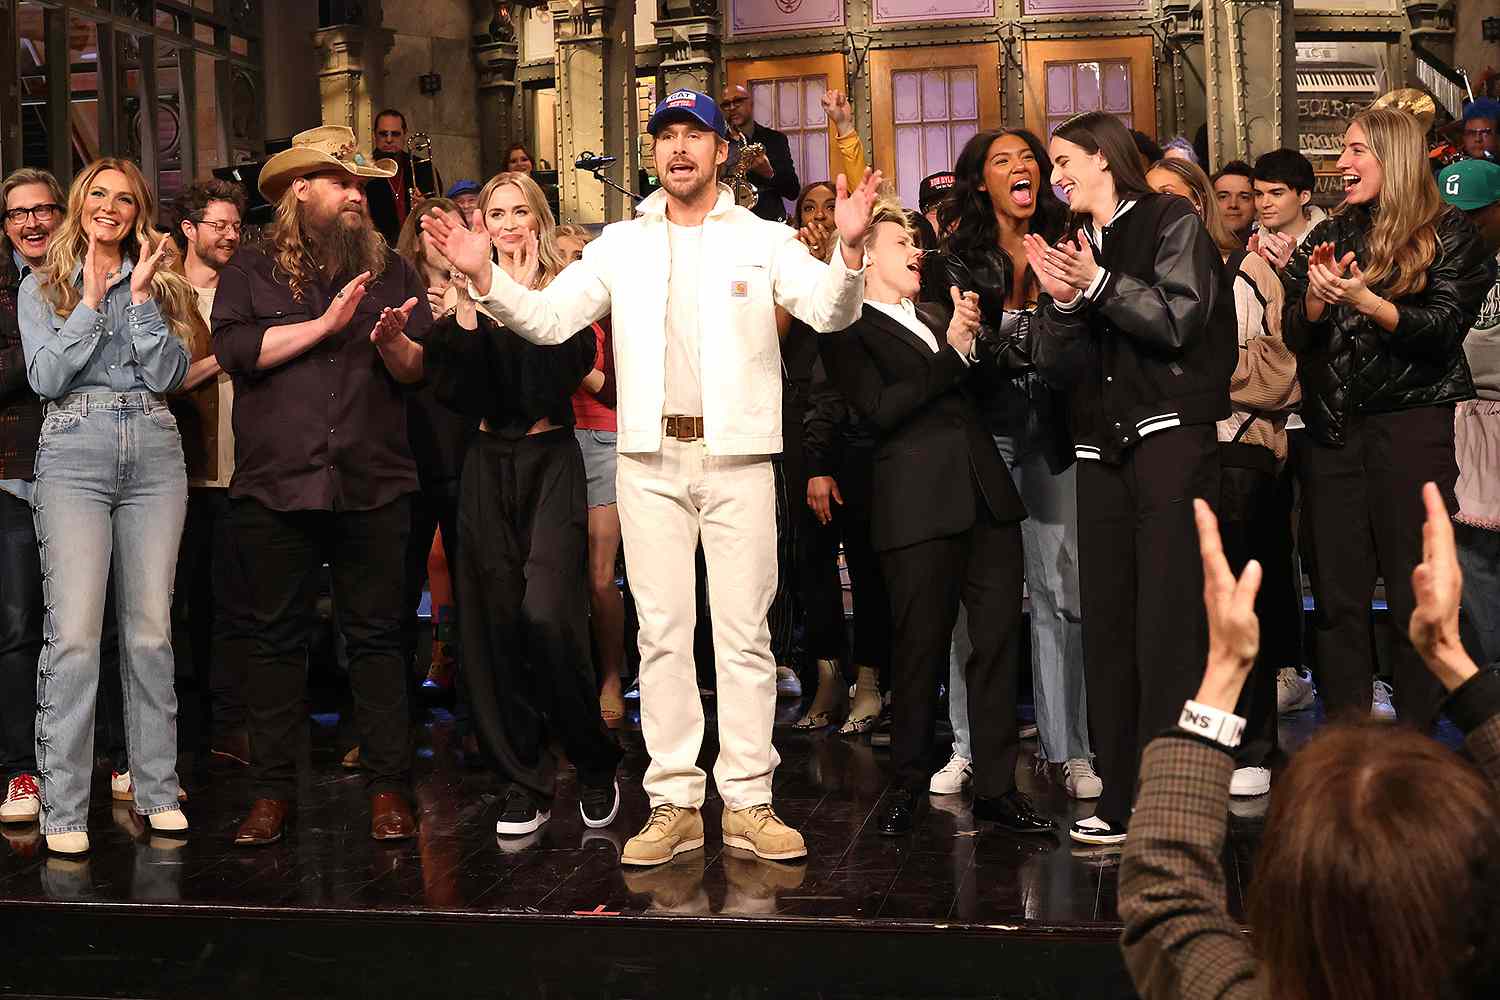 SNL Morgane Stapleton, musical guest Chris Stapleton, surprise guest Emily Blunt, host Ryan Gosling, surprise guest Kate McKinnon, and surprise guest Caitlin Clark during the Goodnights & Credits